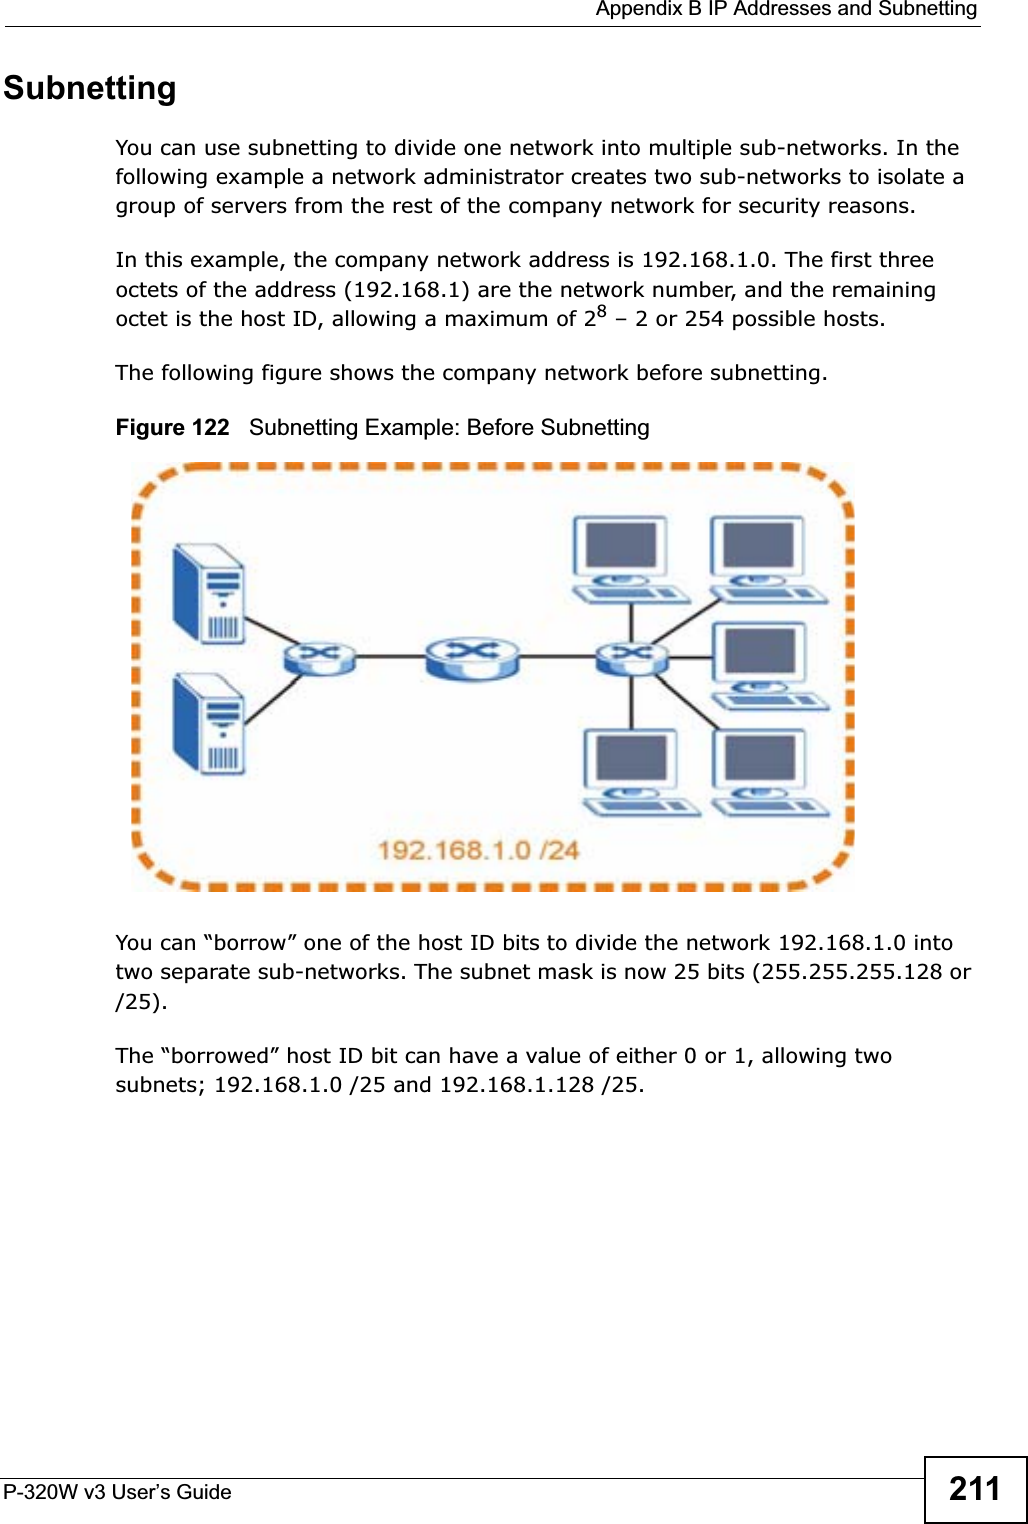  Appendix B IP Addresses and SubnettingP-320W v3 User’s Guide 211SubnettingYou can use subnetting to divide one network into multiple sub-networks. In the following example a network administrator creates two sub-networks to isolate a group of servers from the rest of the company network for security reasons.In this example, the company network address is 192.168.1.0. The first three octets of the address (192.168.1) are the network number, and the remaining octet is the host ID, allowing a maximum of 28 – 2 or 254 possible hosts.The following figure shows the company network before subnetting.  Figure 122   Subnetting Example: Before SubnettingYou can “borrow” one of the host ID bits to divide the network 192.168.1.0 into two separate sub-networks. The subnet mask is now 25 bits (255.255.255.128 or /25).The “borrowed” host ID bit can have a value of either 0 or 1, allowing two subnets; 192.168.1.0 /25 and 192.168.1.128 /25. 